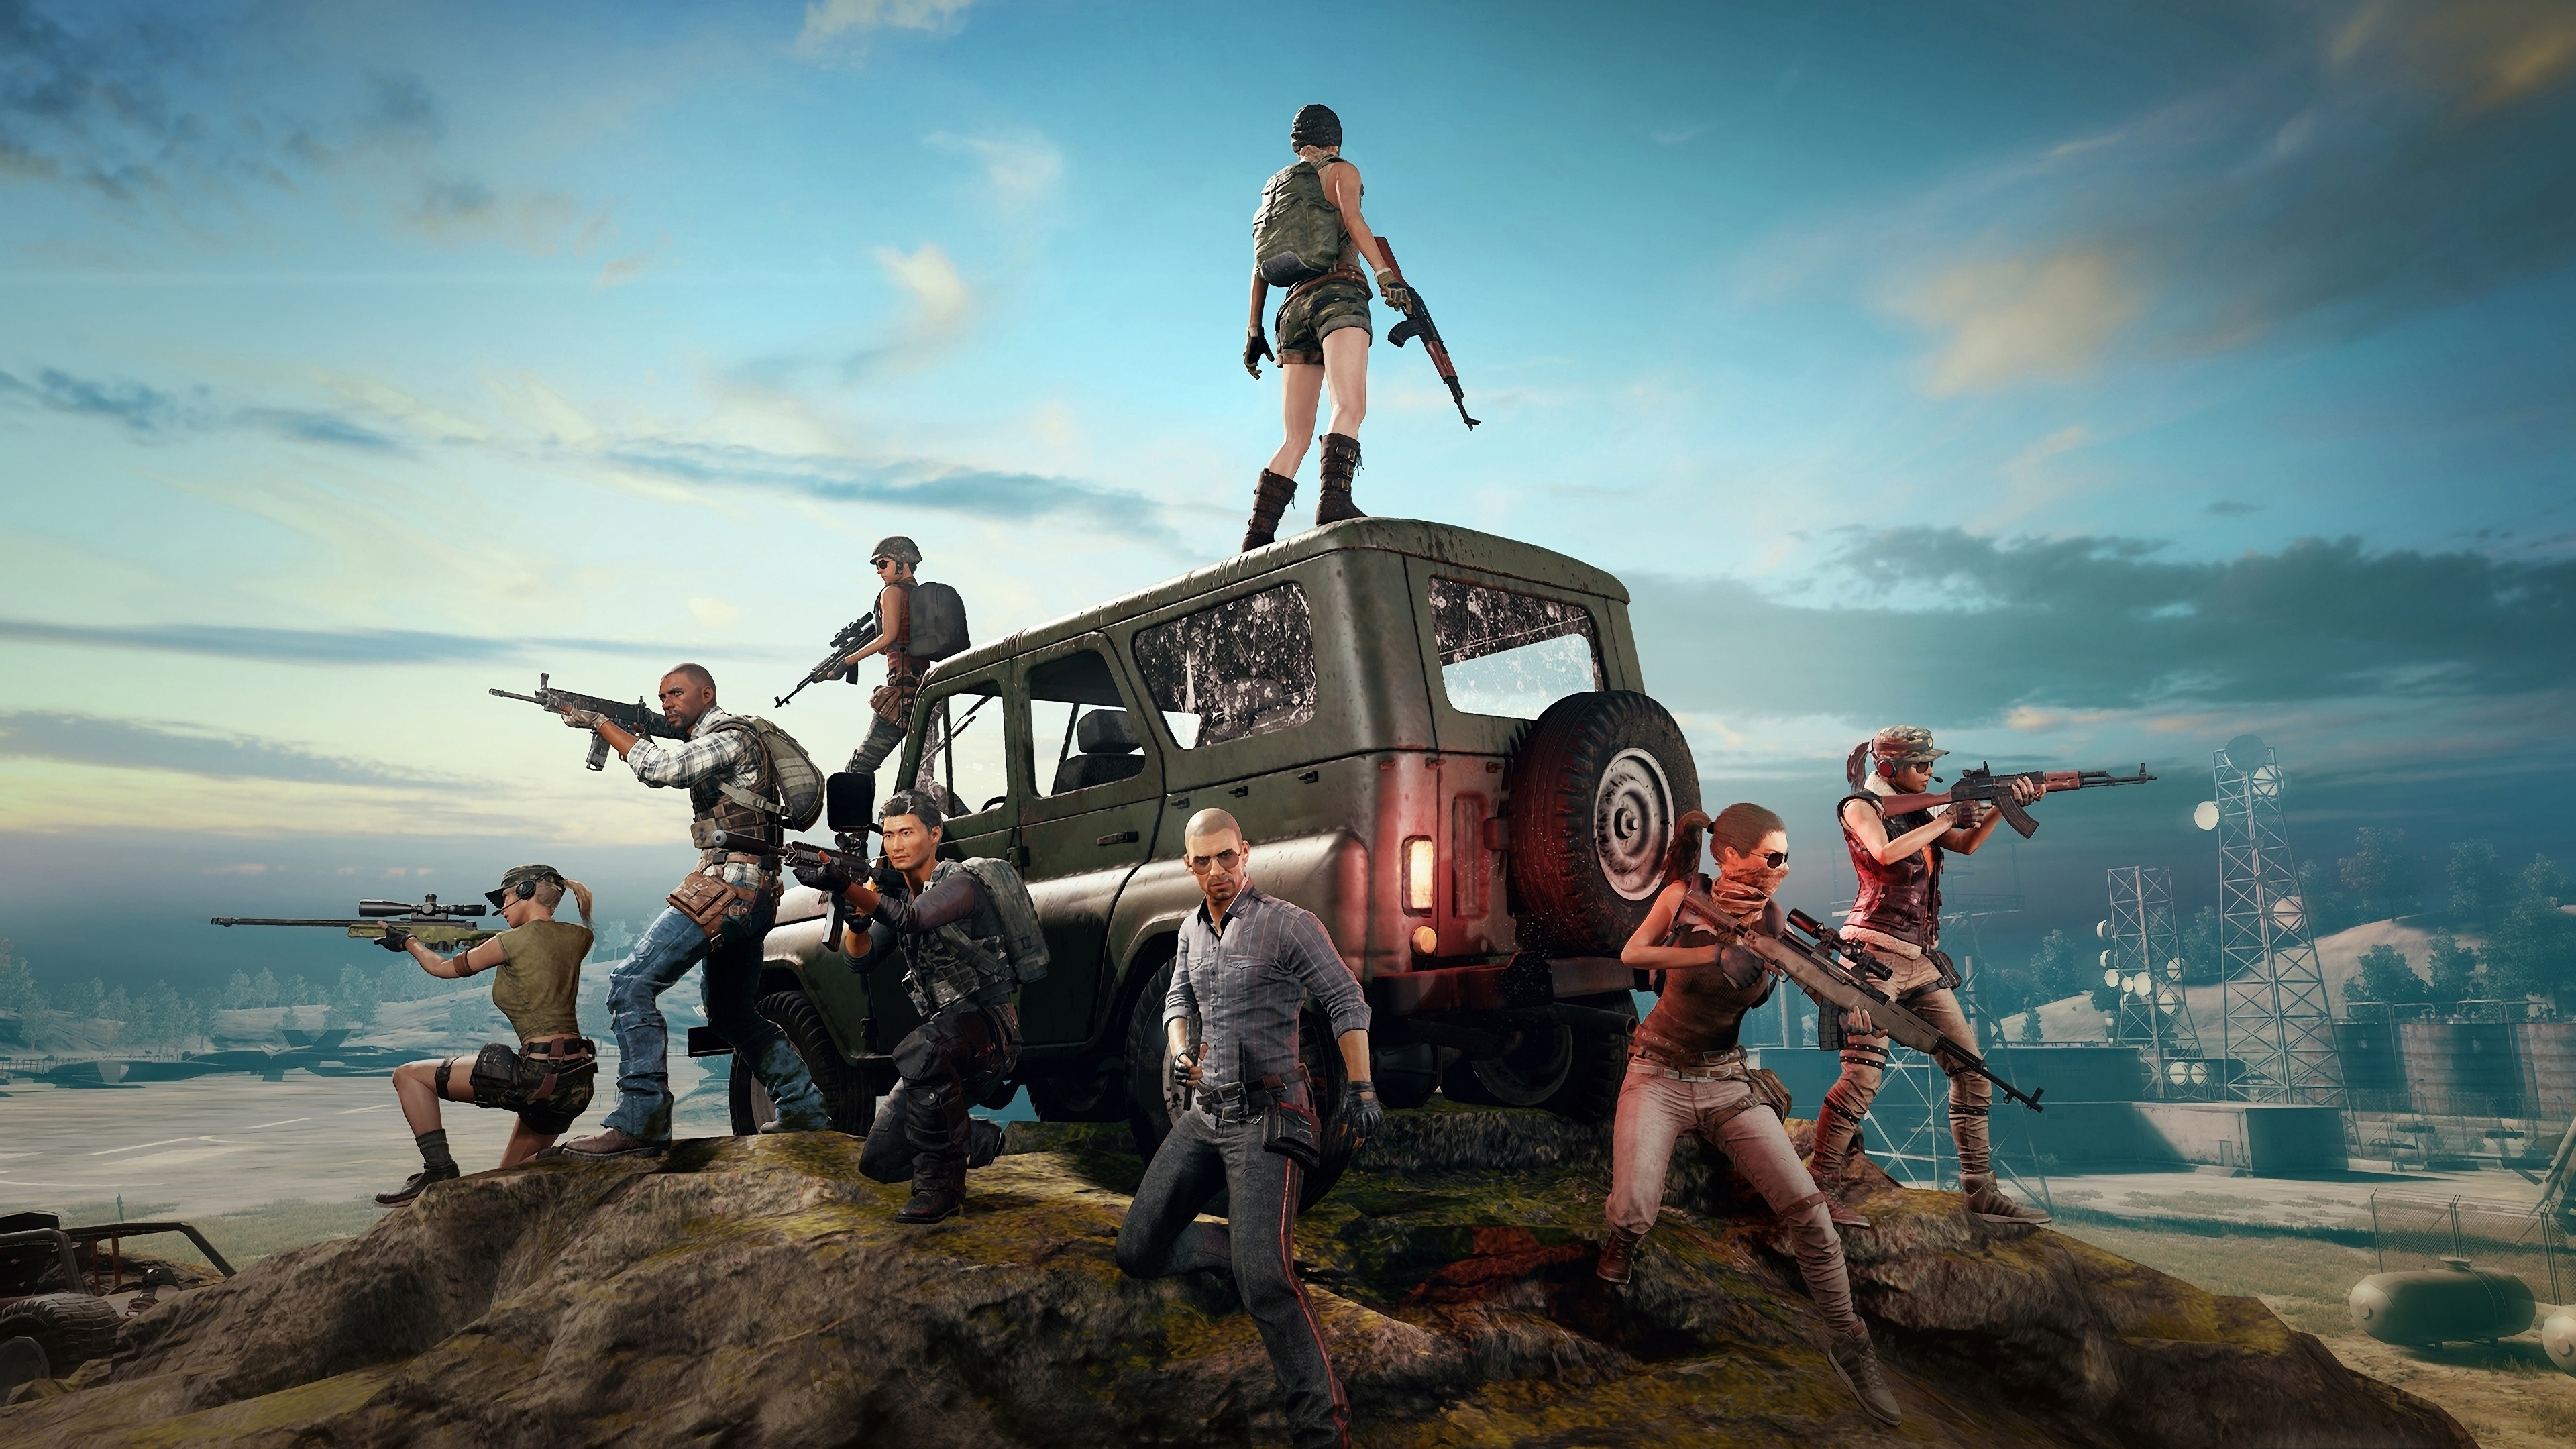 2018 4k PlayerUnknowns Battlegrounds, HD Games, 4k Wallpapers, Images, Backgrounds, Photos and 